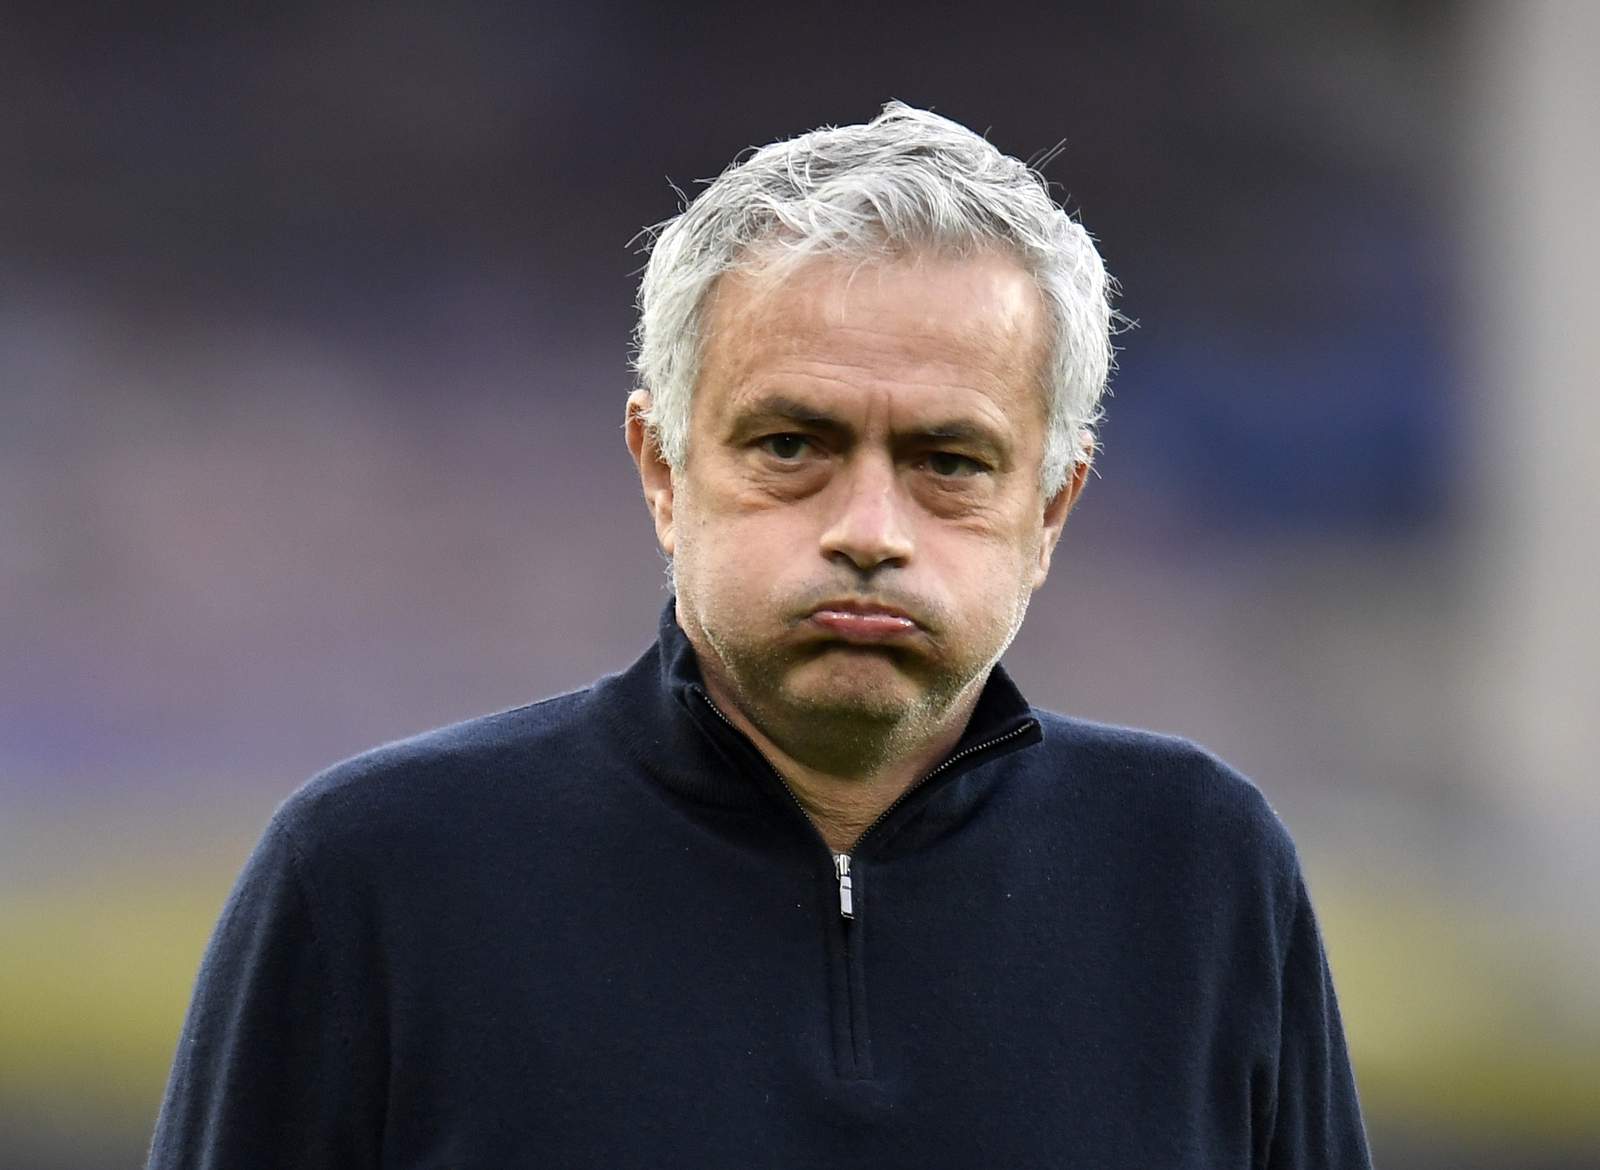 Mourinho fired by Tottenham 6 days before cup final